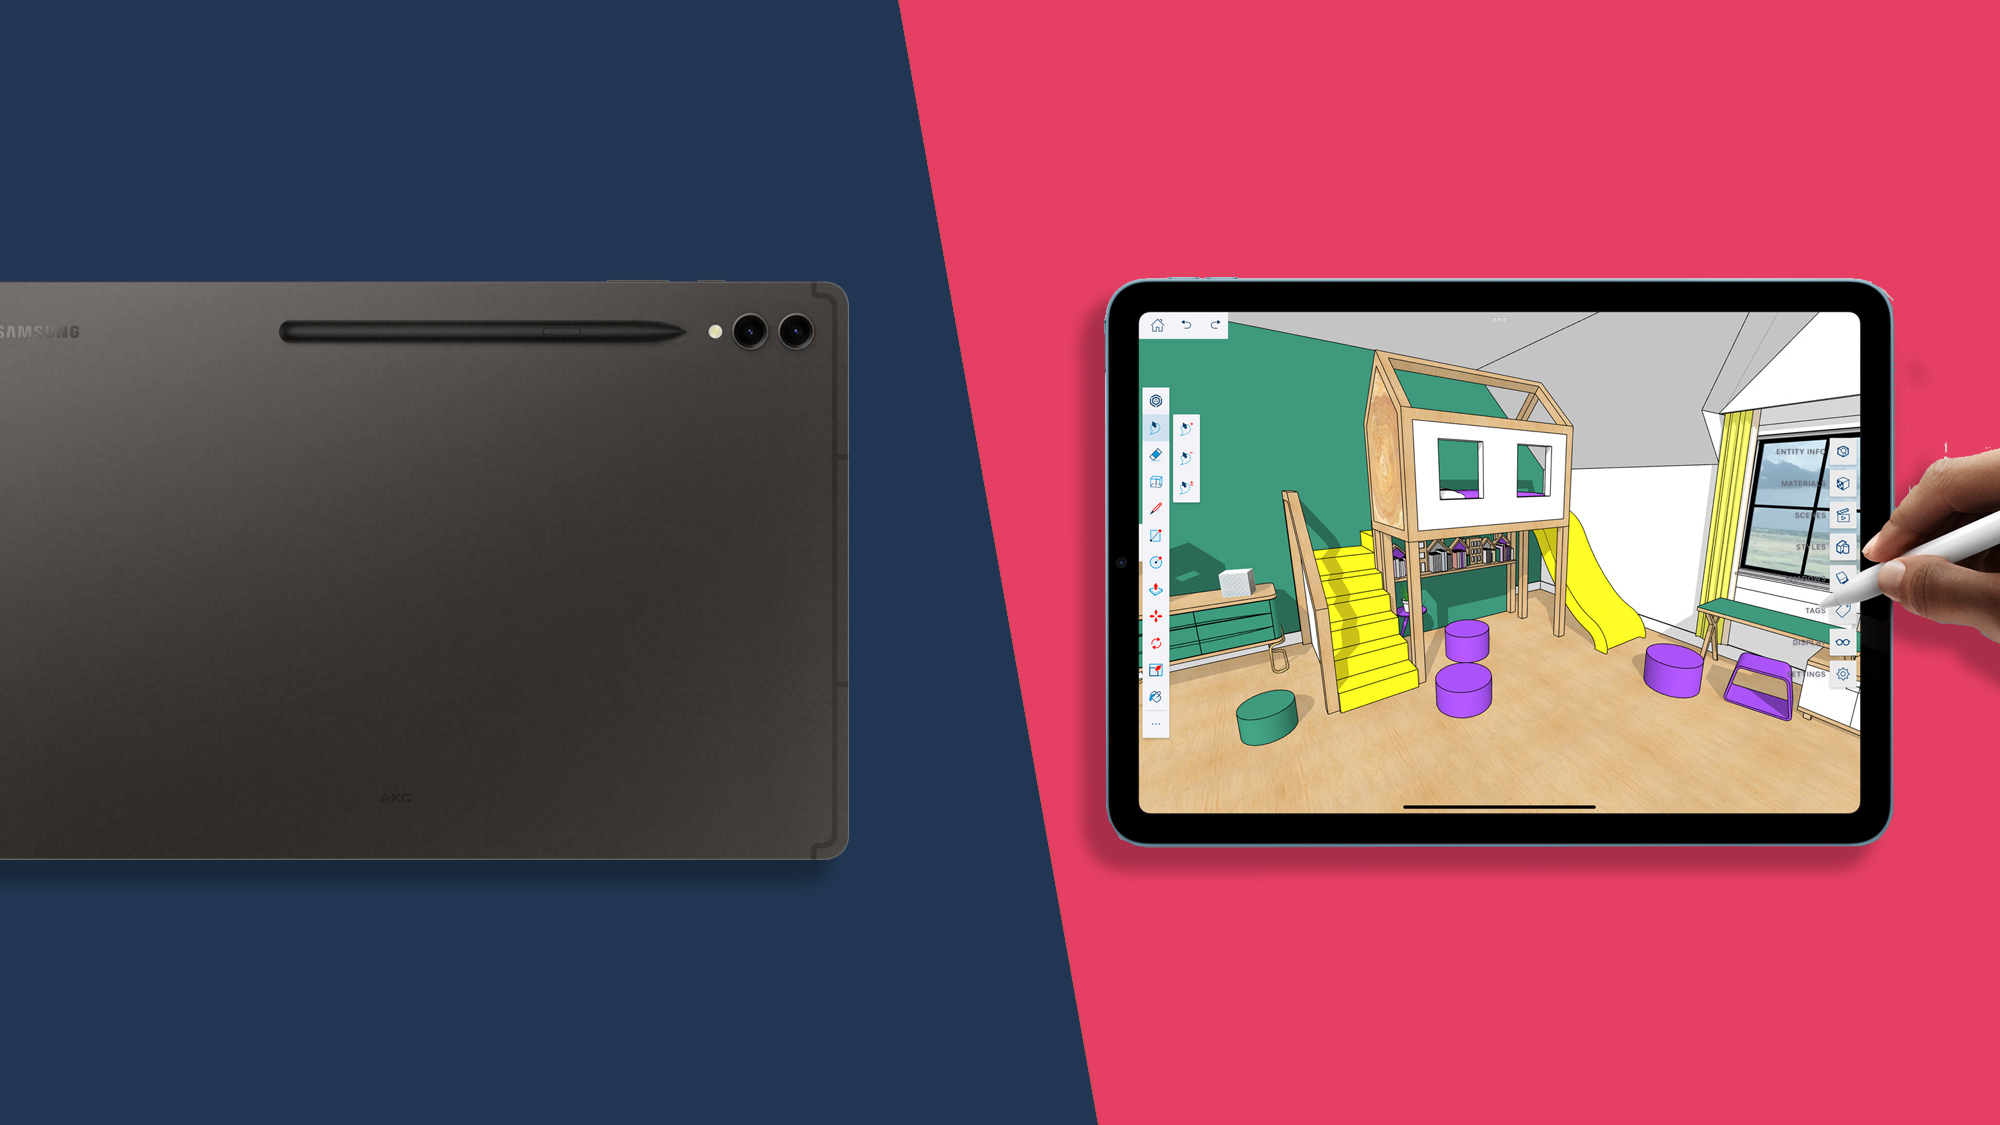 The Galaxy Tab on the left and iPad Air on the right, we see the back of the Samsung tablet and someone is drawing on the iPad using the Apple Pencil